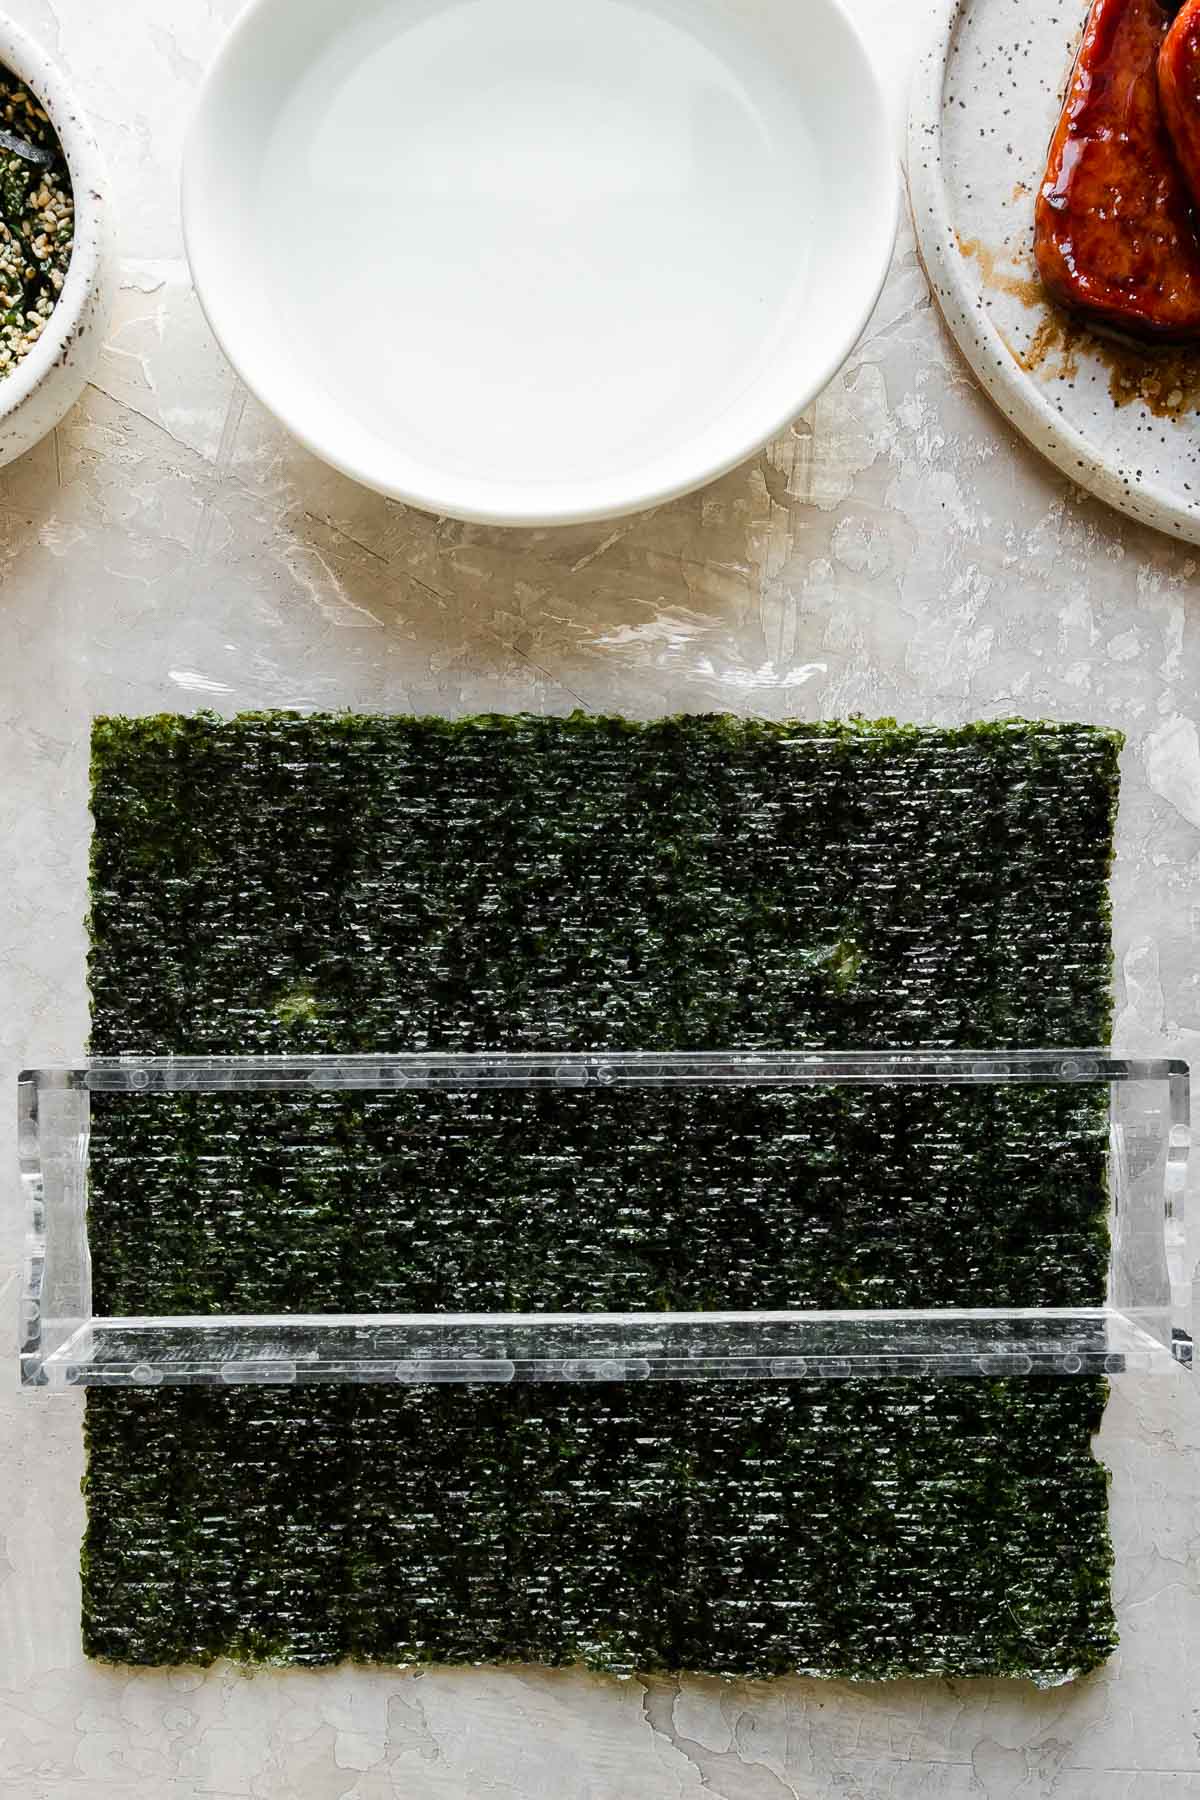 How to make Hawaiian spam musubi, step 4: Prep the nori & musubi mold. A close up of a single sheet of sushi nori rests atop a piece of plastic wrap that sits atop a creamy white textured surface. The outer box of a double musubi mold is arranged in the center of the sushi nori with the long edge of the mold running parallel with the long edge of the nori. Resting above the nori & the musubi mold is a small bowl filled with furikake seasoning with a spoon resting inside, another small white bowl filled with water, and a small speckled ceramic plate with pan-fried teriyaki Spam.